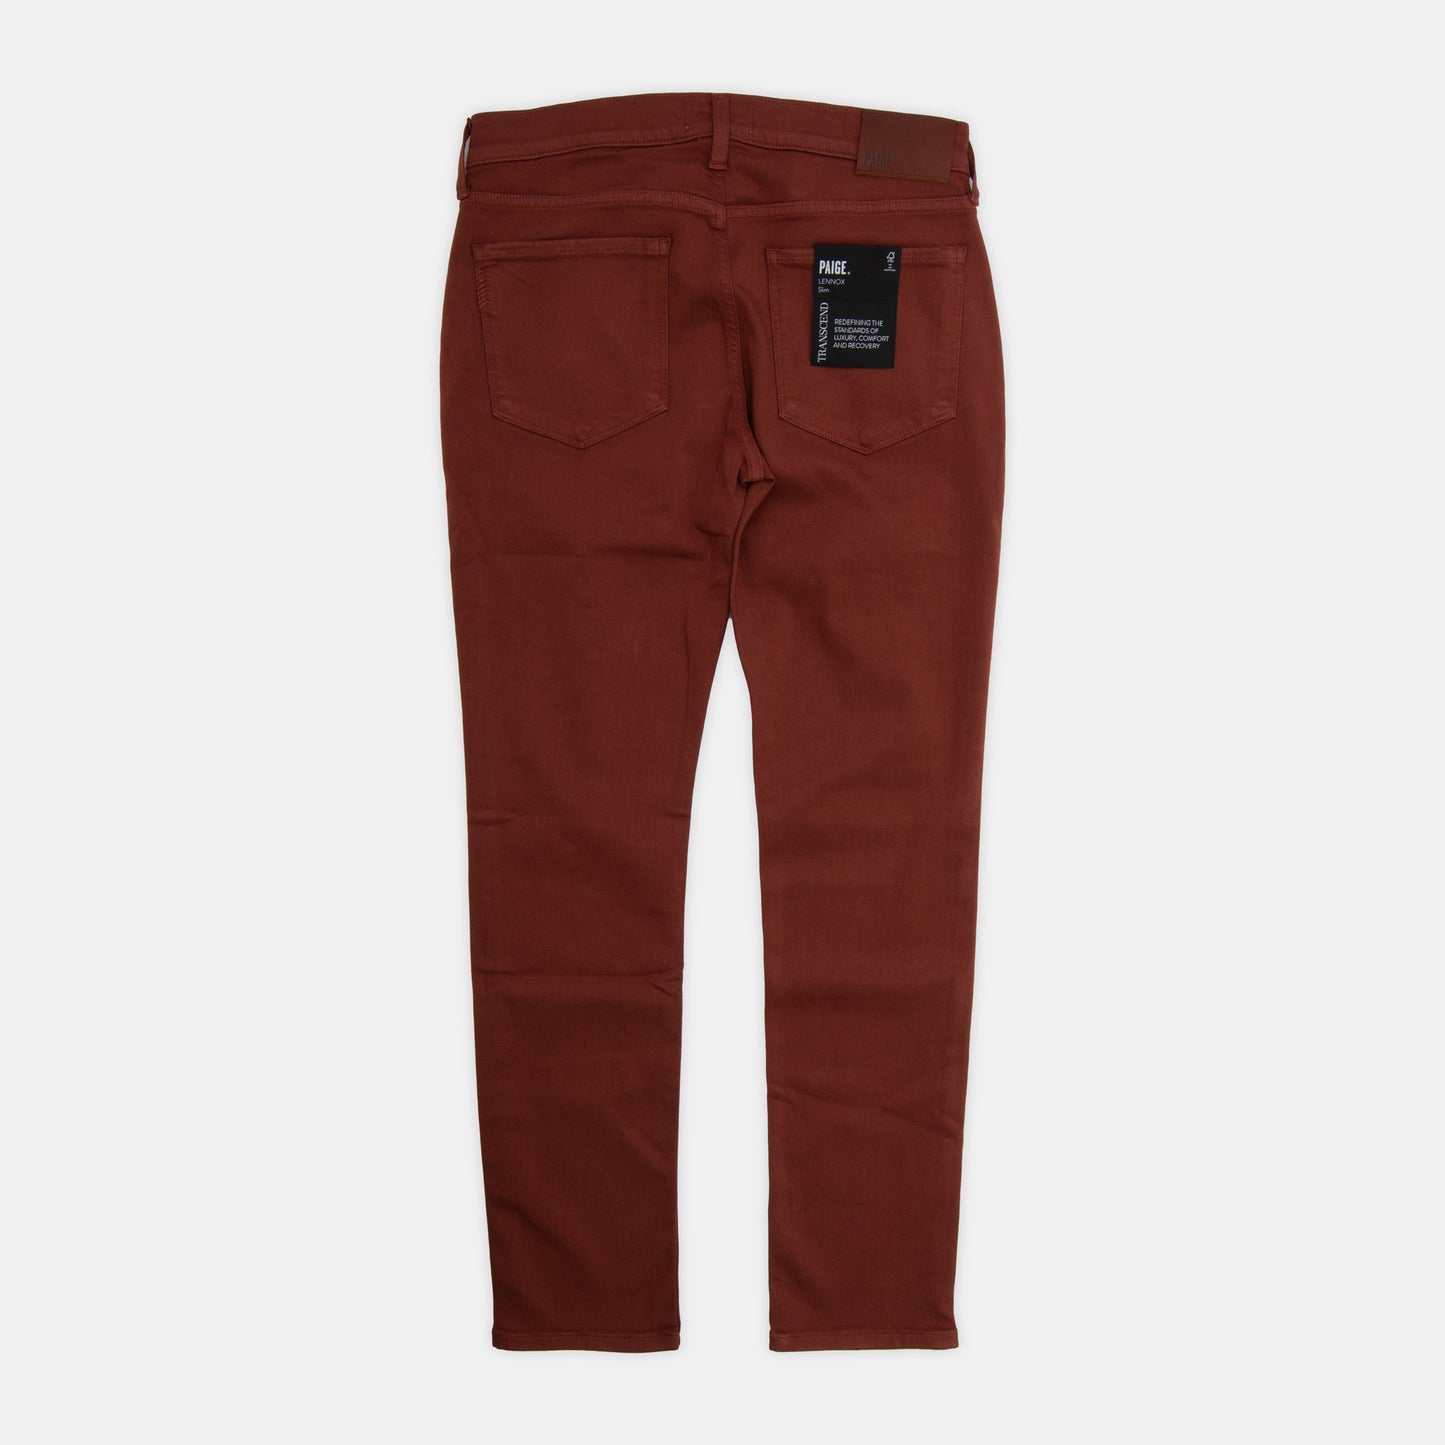 Paige - Lennox Slim 5-Pocket Pant in Cherry Cola Red